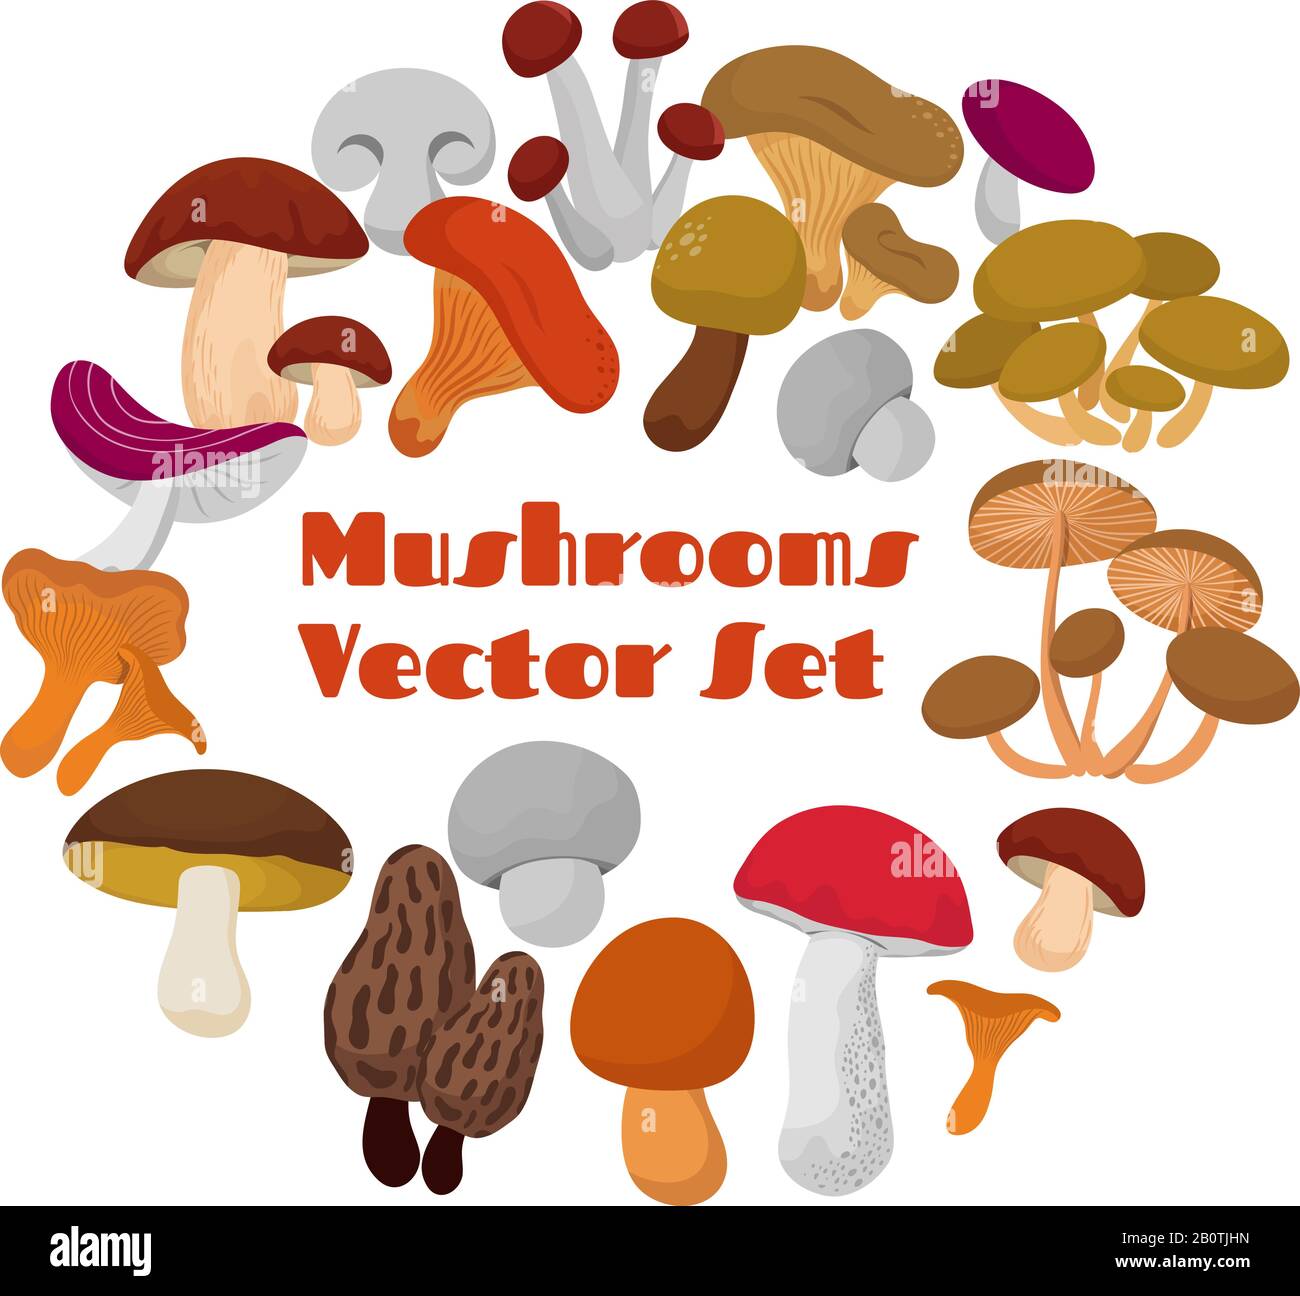 Delicacies fresh edible mushrooms vector set. Mushrooms of collection in round form illustration Stock Vector